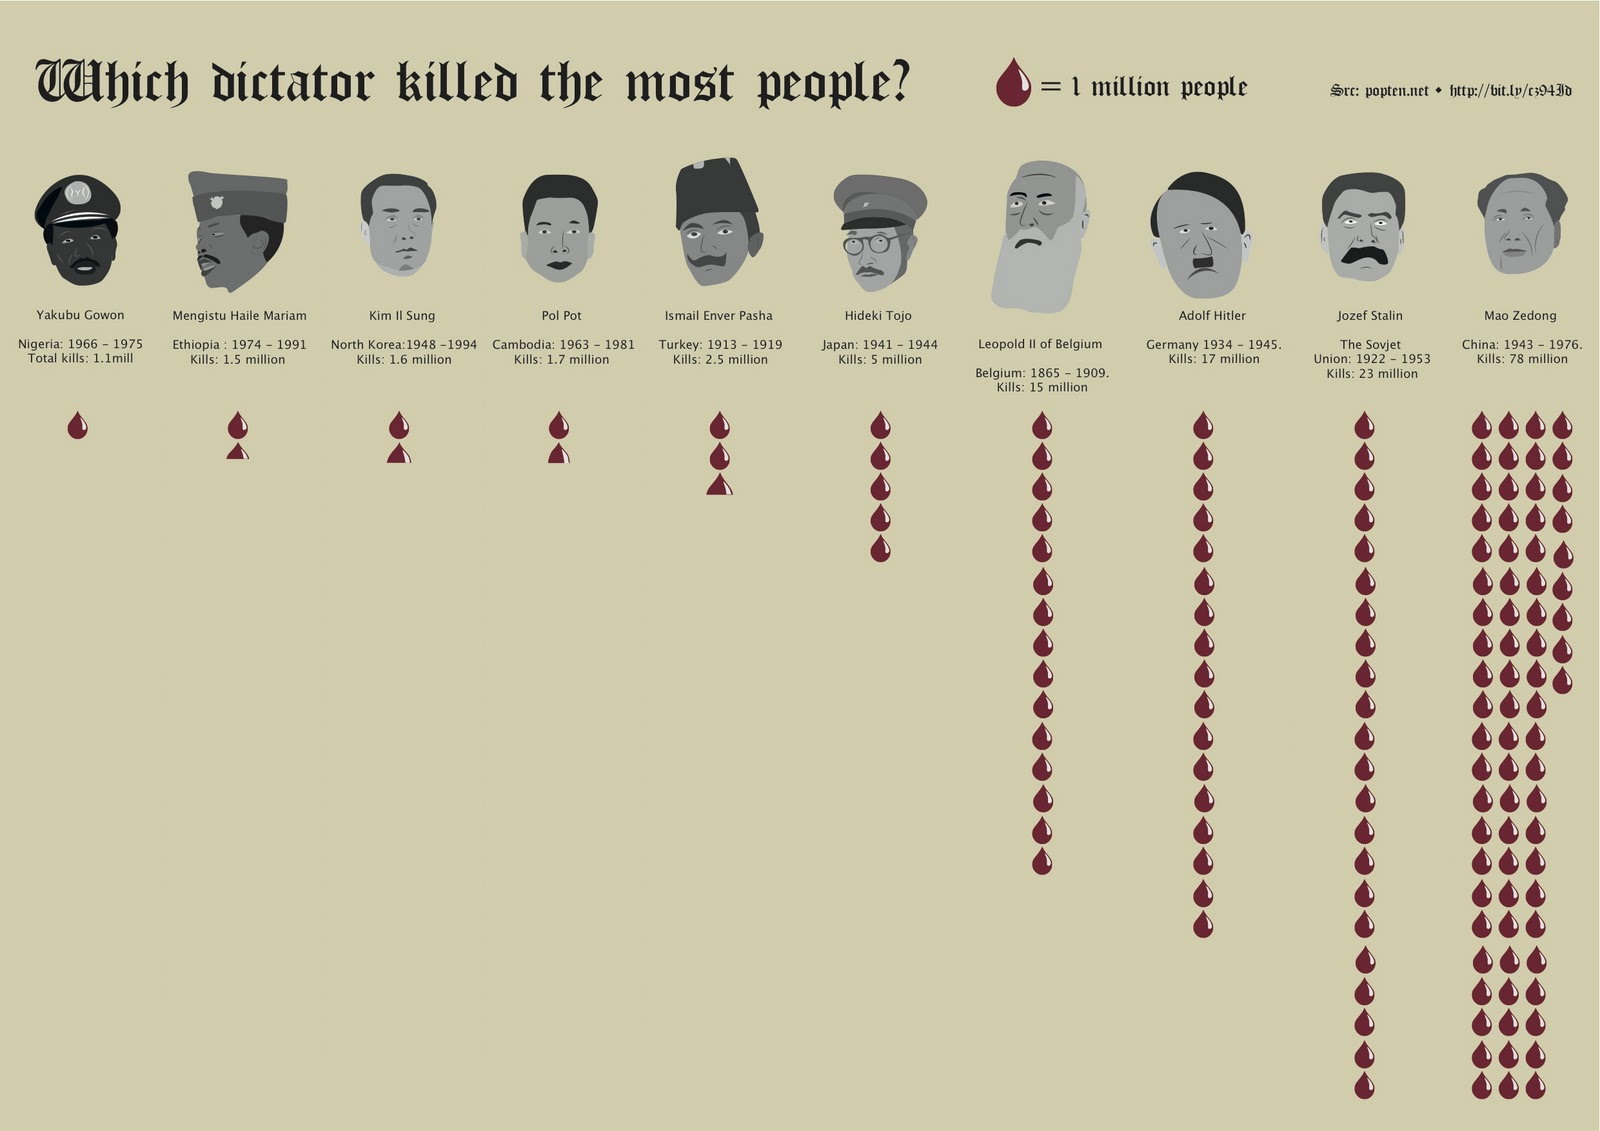 Who killed the most people?